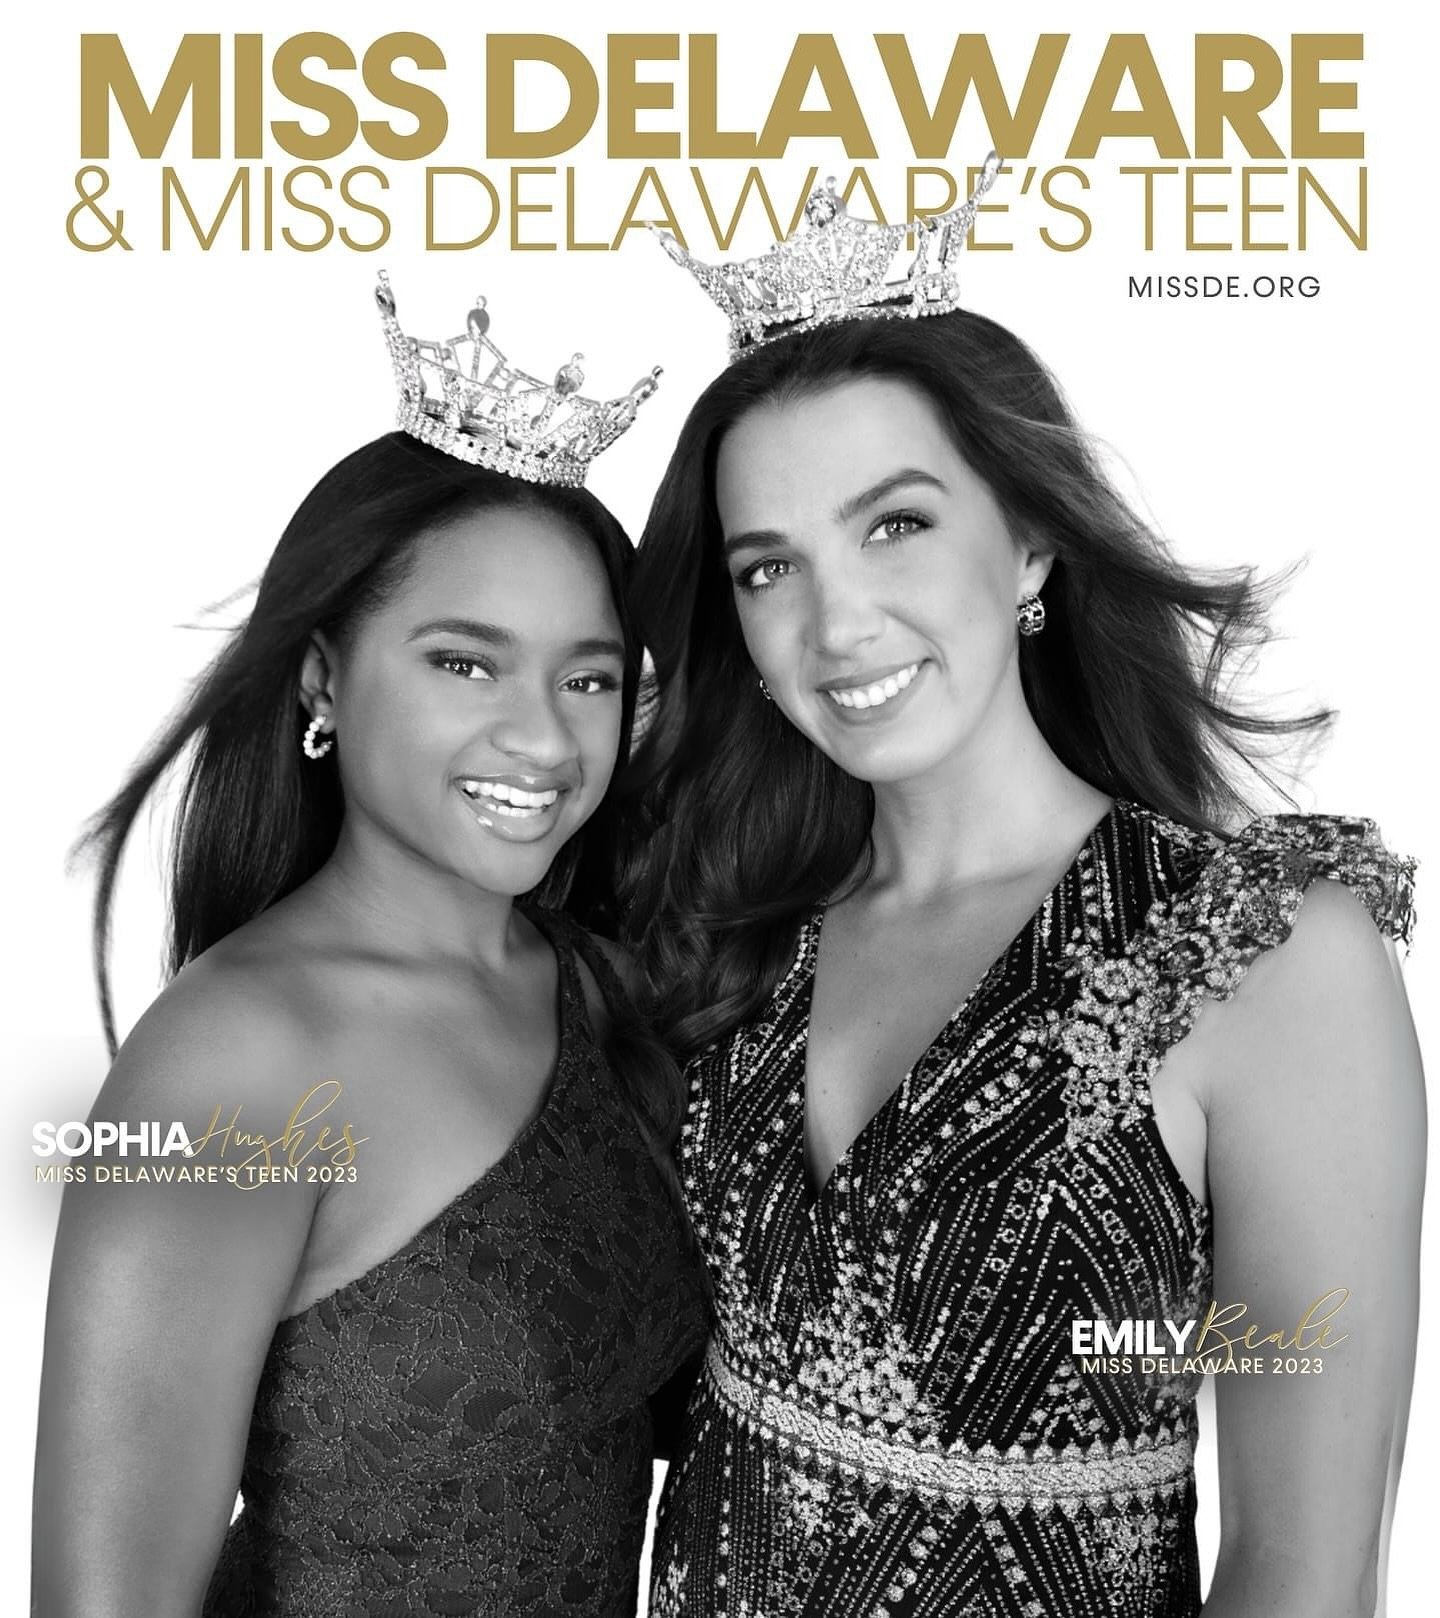 Are you the next Miss Delaware or Miss Delaware's Teen?? Registration closes this SATURDAY! Visit MissDE.org/join-us for more details &amp; we will see you on the stage in June! ✨👑